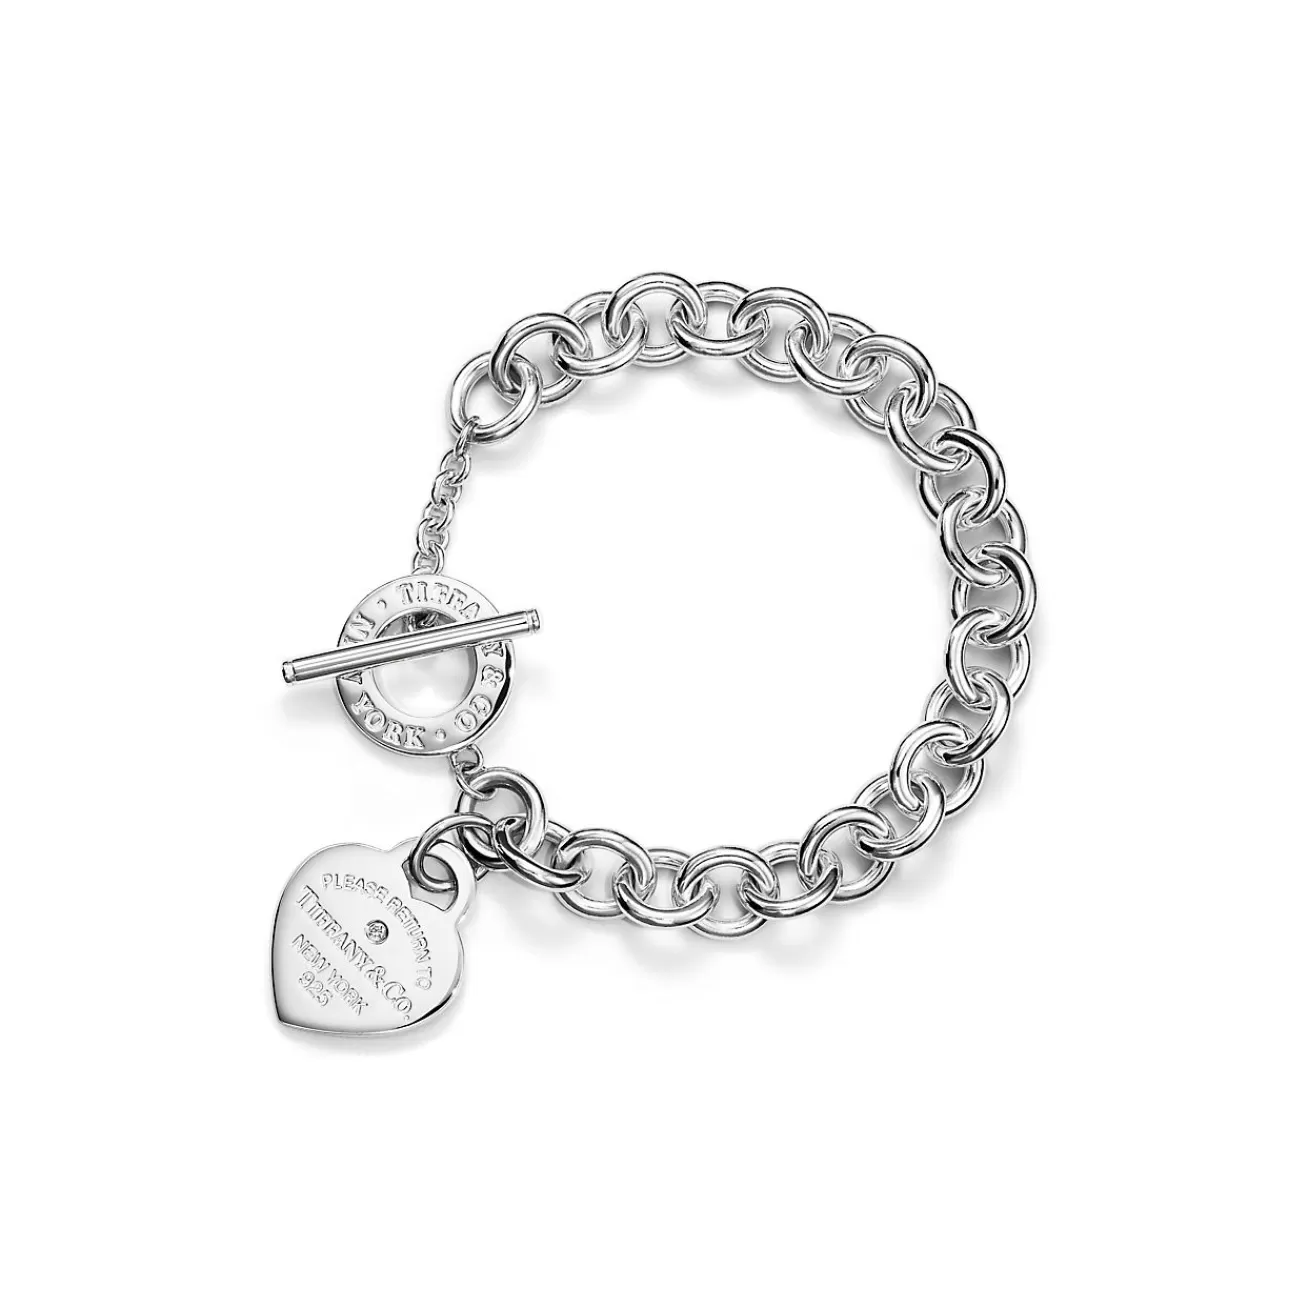 Tiffany & Co. Return to Tiffany® Heart Tag Bracelet in Silver with a Diamond, Medium | ^ Bracelets | Gifts for Her